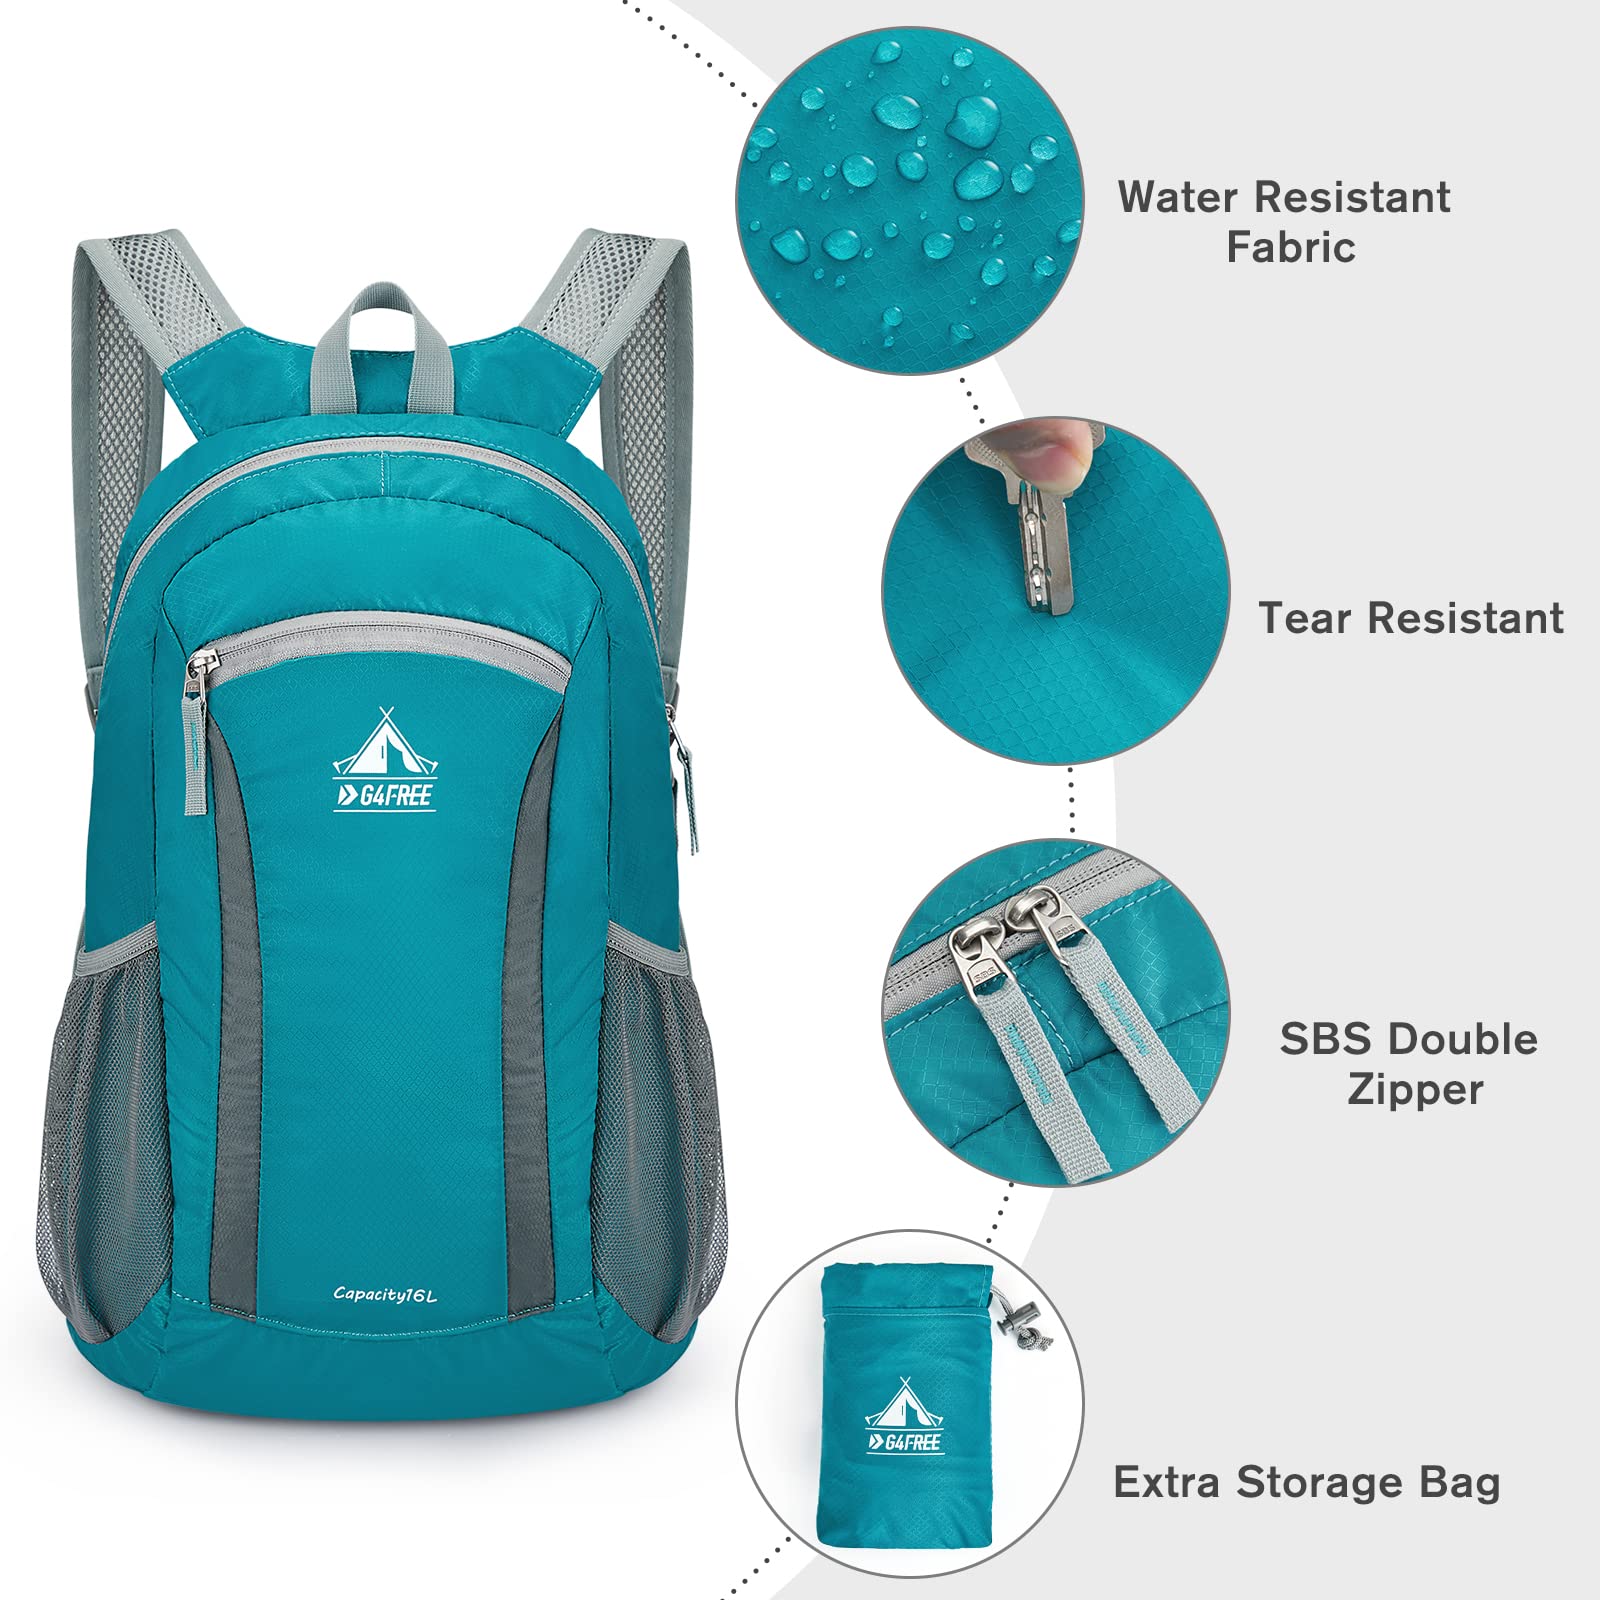 G4Free 10L Hiking Backpack Small Travel Hiking Daypack Lightweight Packable  Backpack Casual Foldable Shoulder Bag